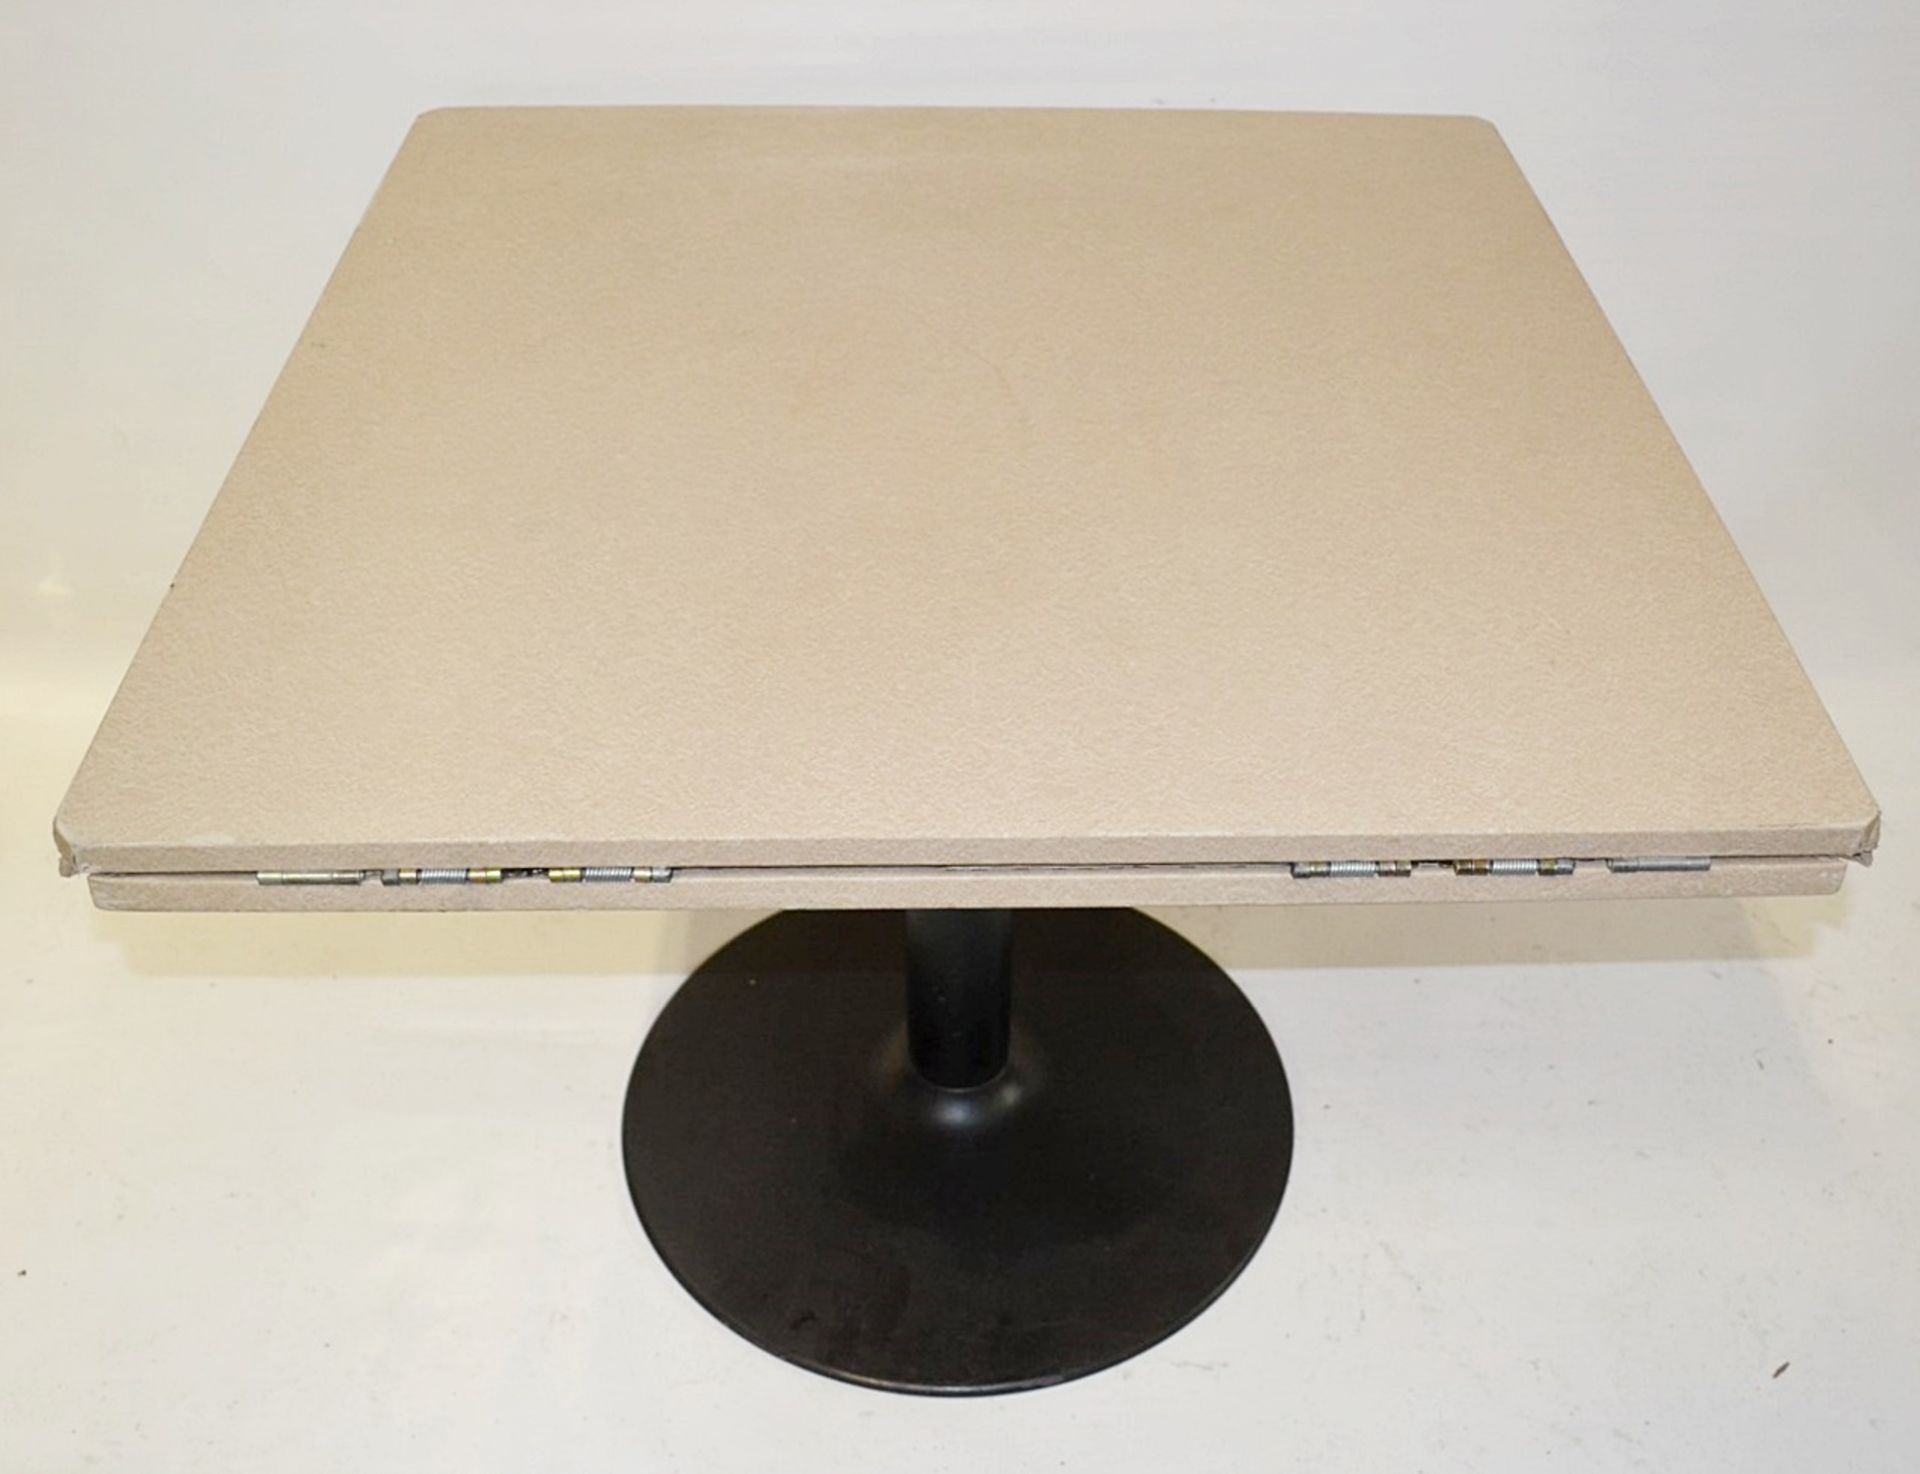 4 x Bespoke Upholstered Extending Bistro Tables - Recently Removed From Department Store - Presented - Image 2 of 7